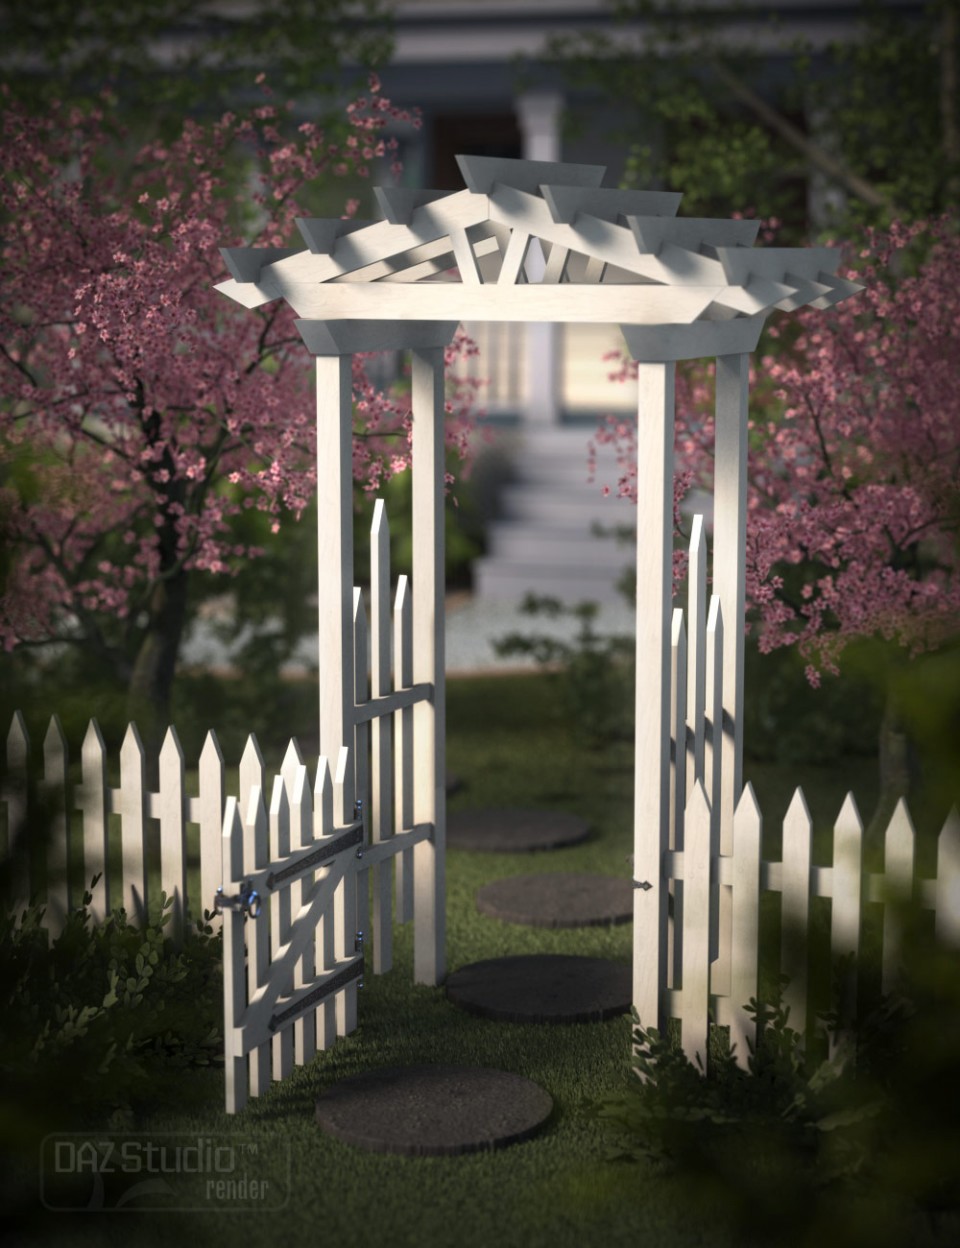 If You Build It – Picket Fence_DAZ3D下载站